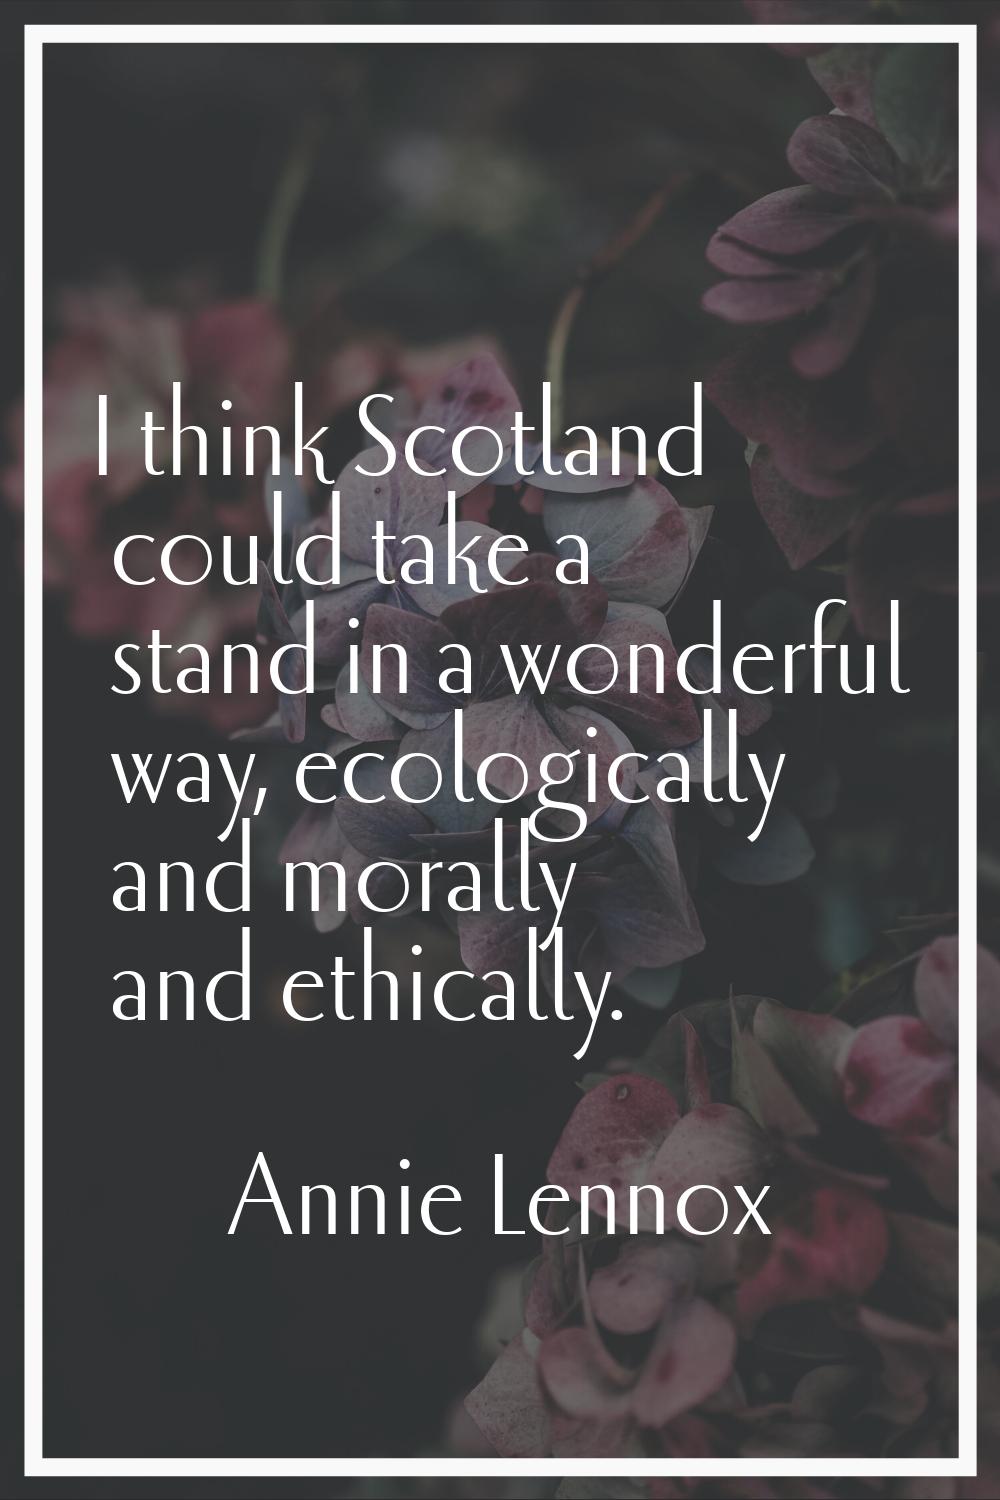 I think Scotland could take a stand in a wonderful way, ecologically and morally and ethically.